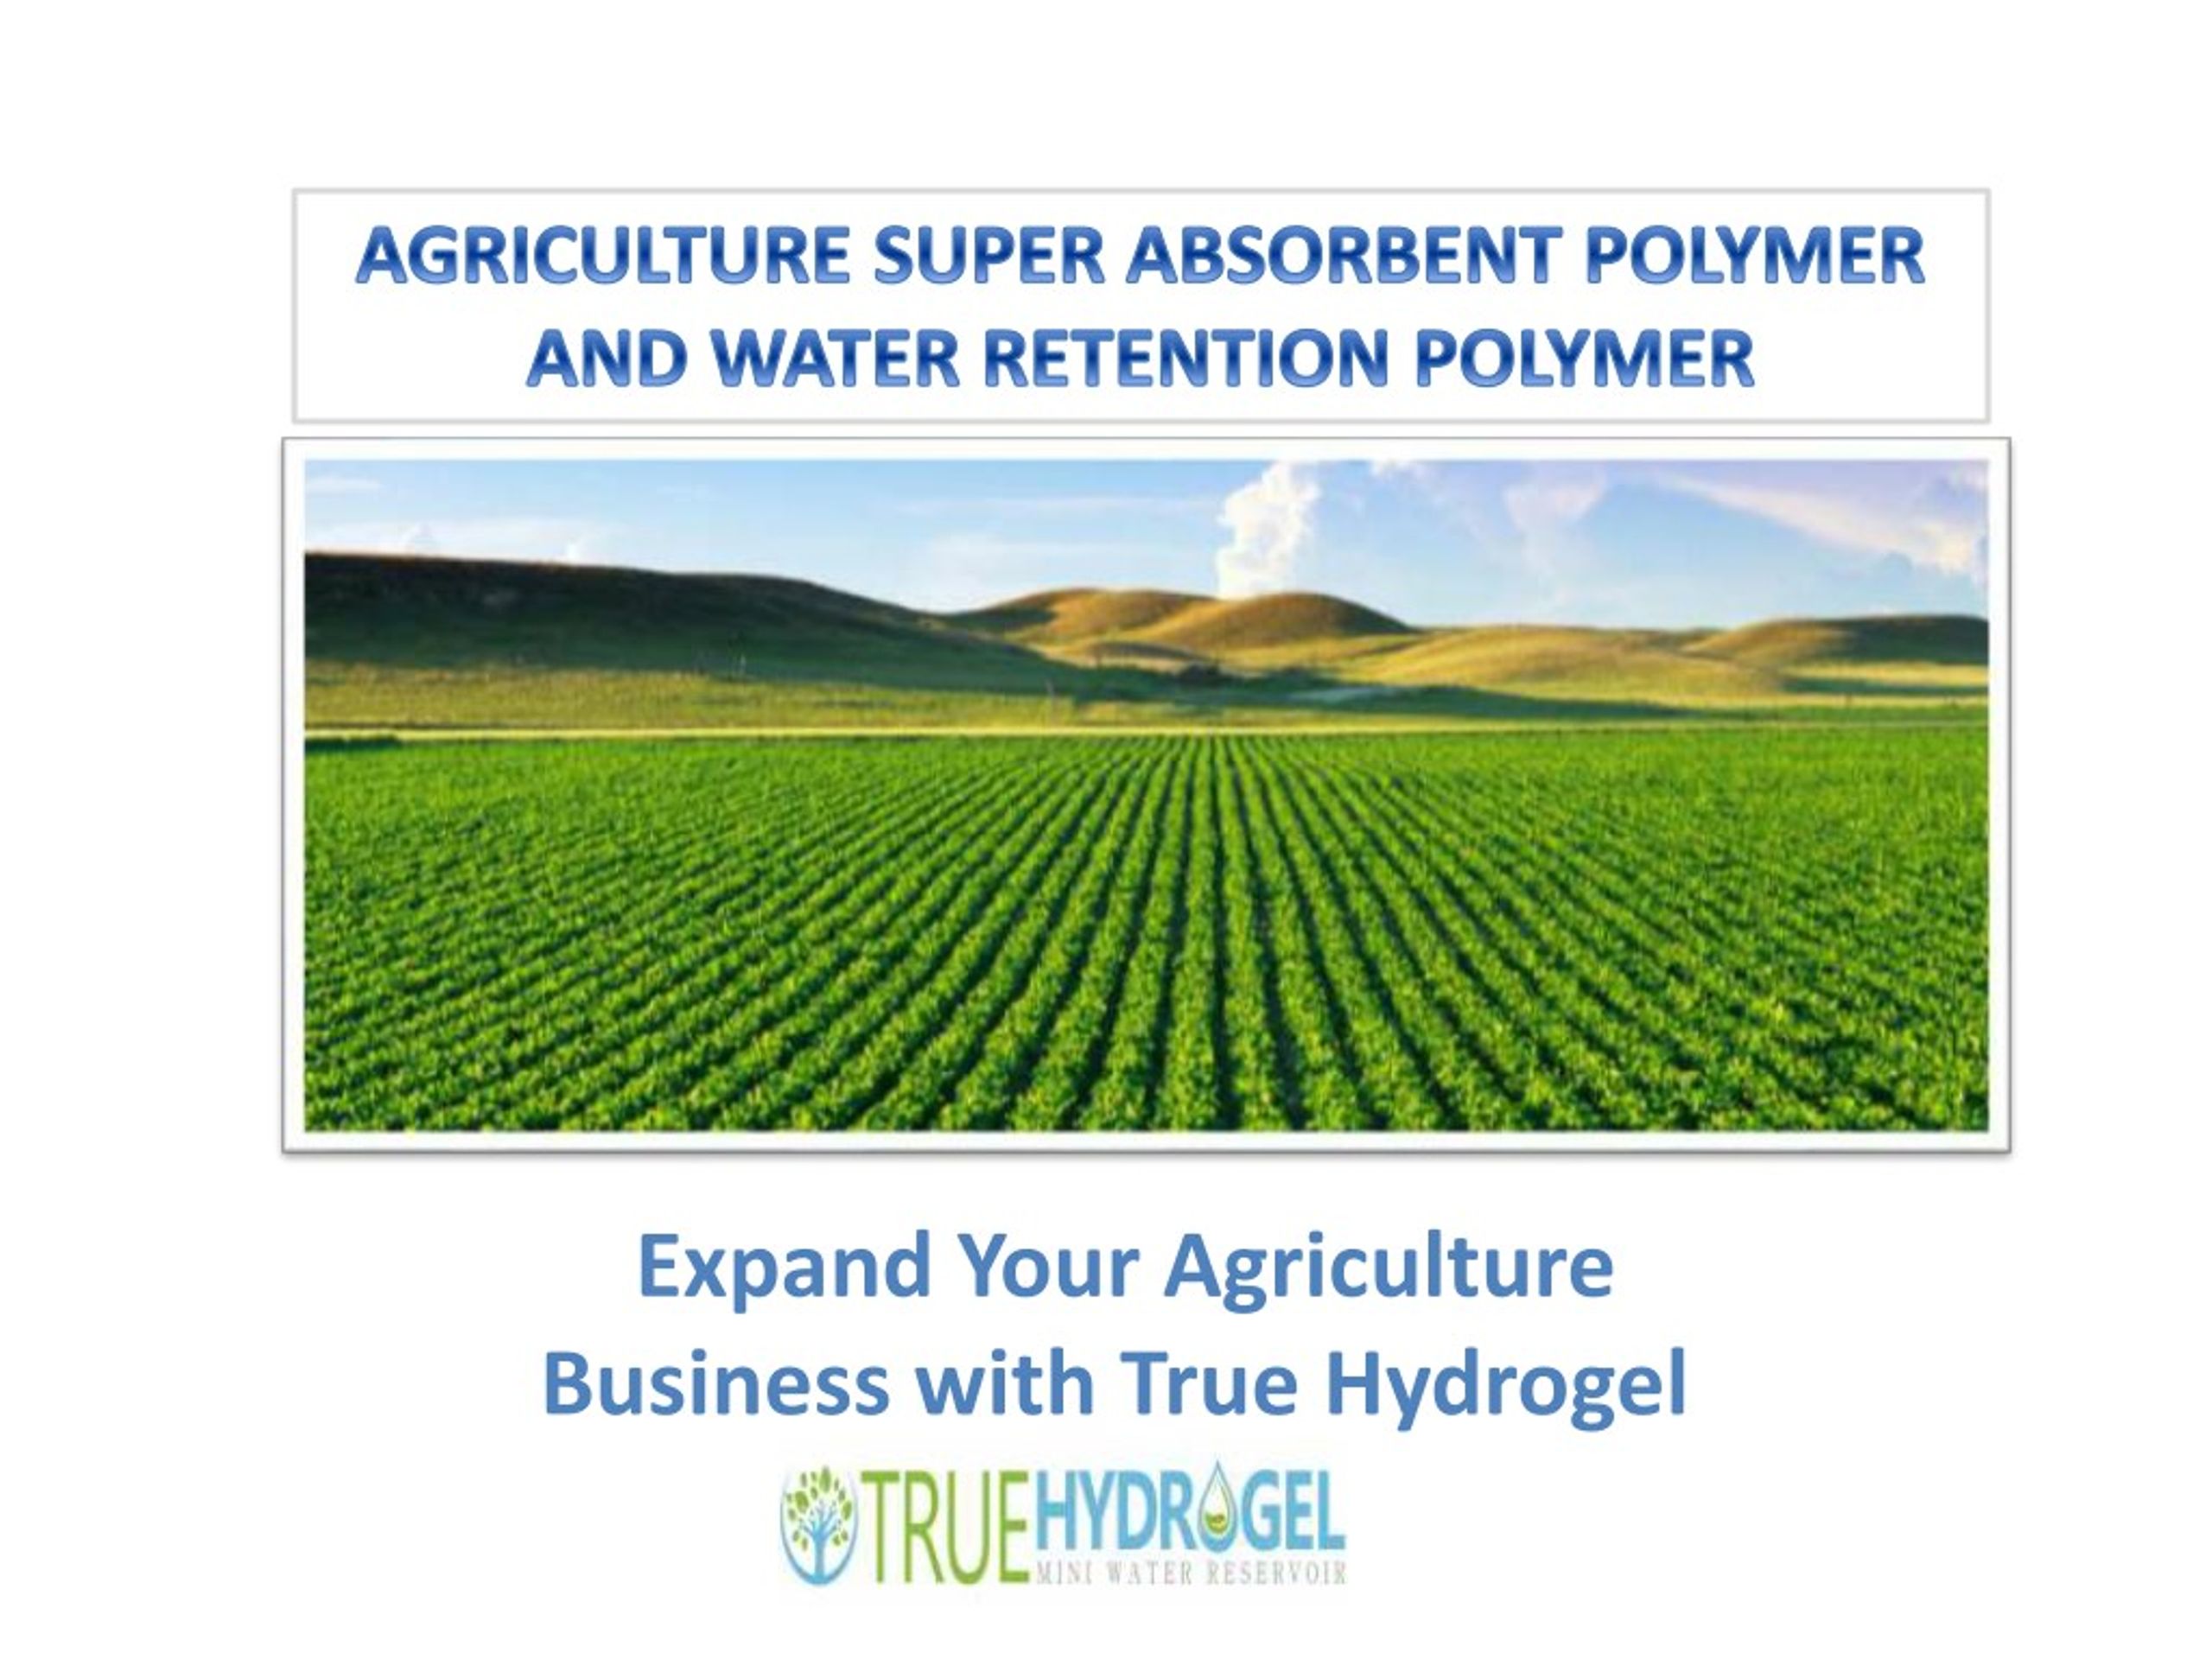 Pro-SAP as Super Absorbent Polymer for Agriculture